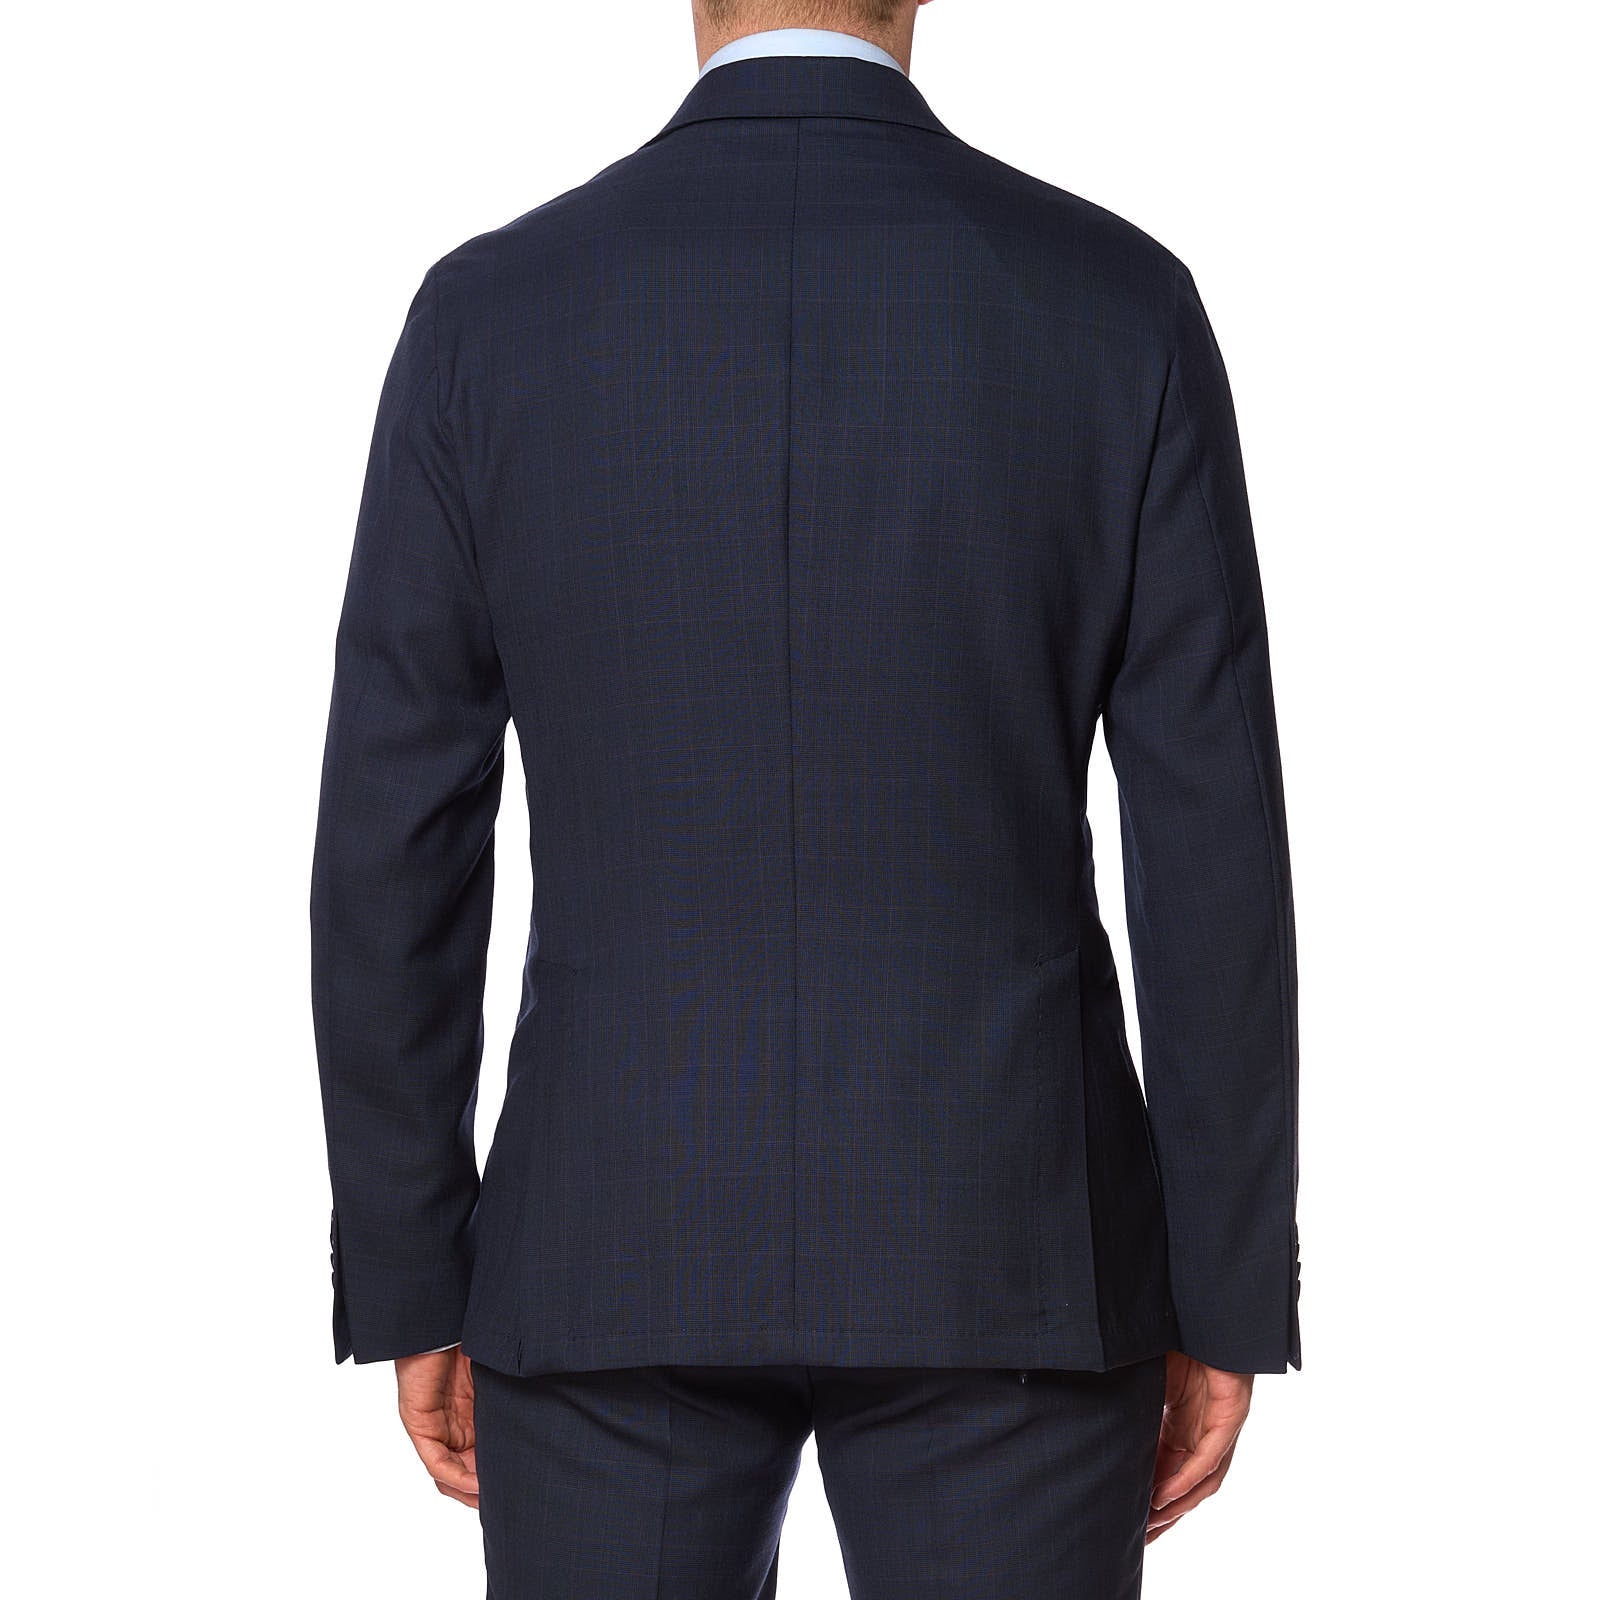 SARTORIA PARTENOPEA Blue Plaid Wool Unlined Suit NEW  Current Model